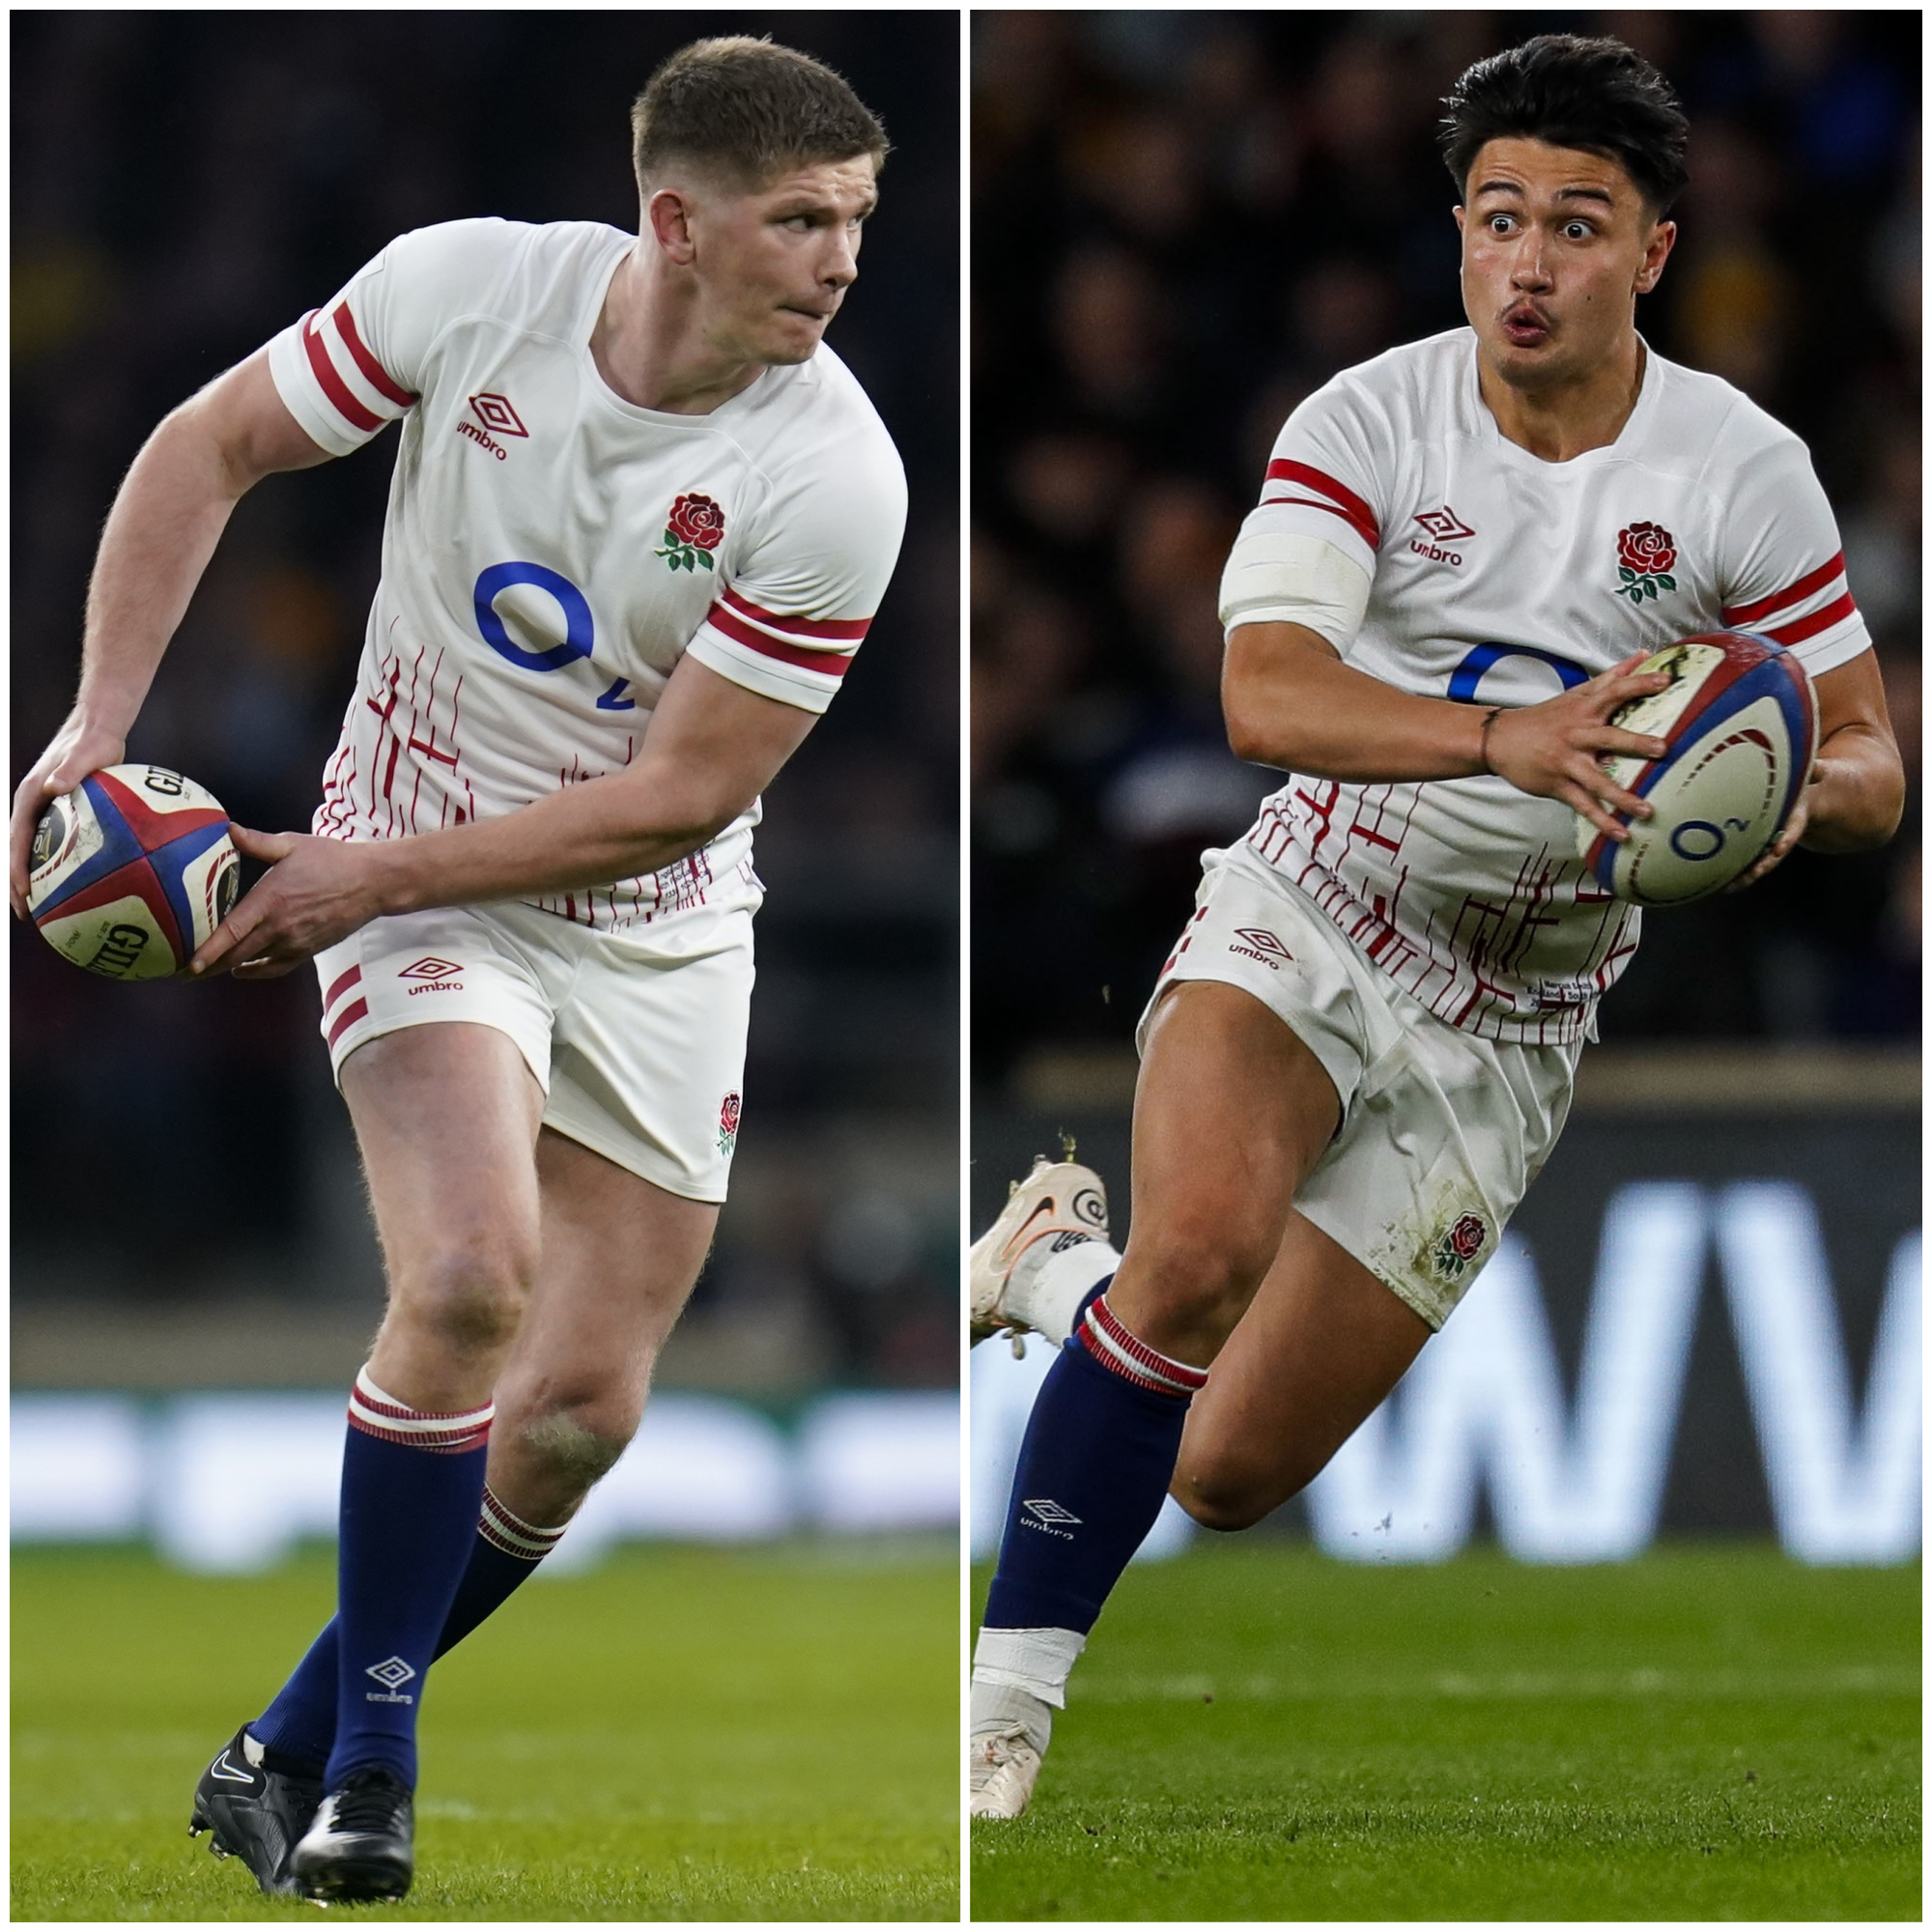 Owen Farrell v Marcus Smith – The battle to be England’s first-choice fly-half